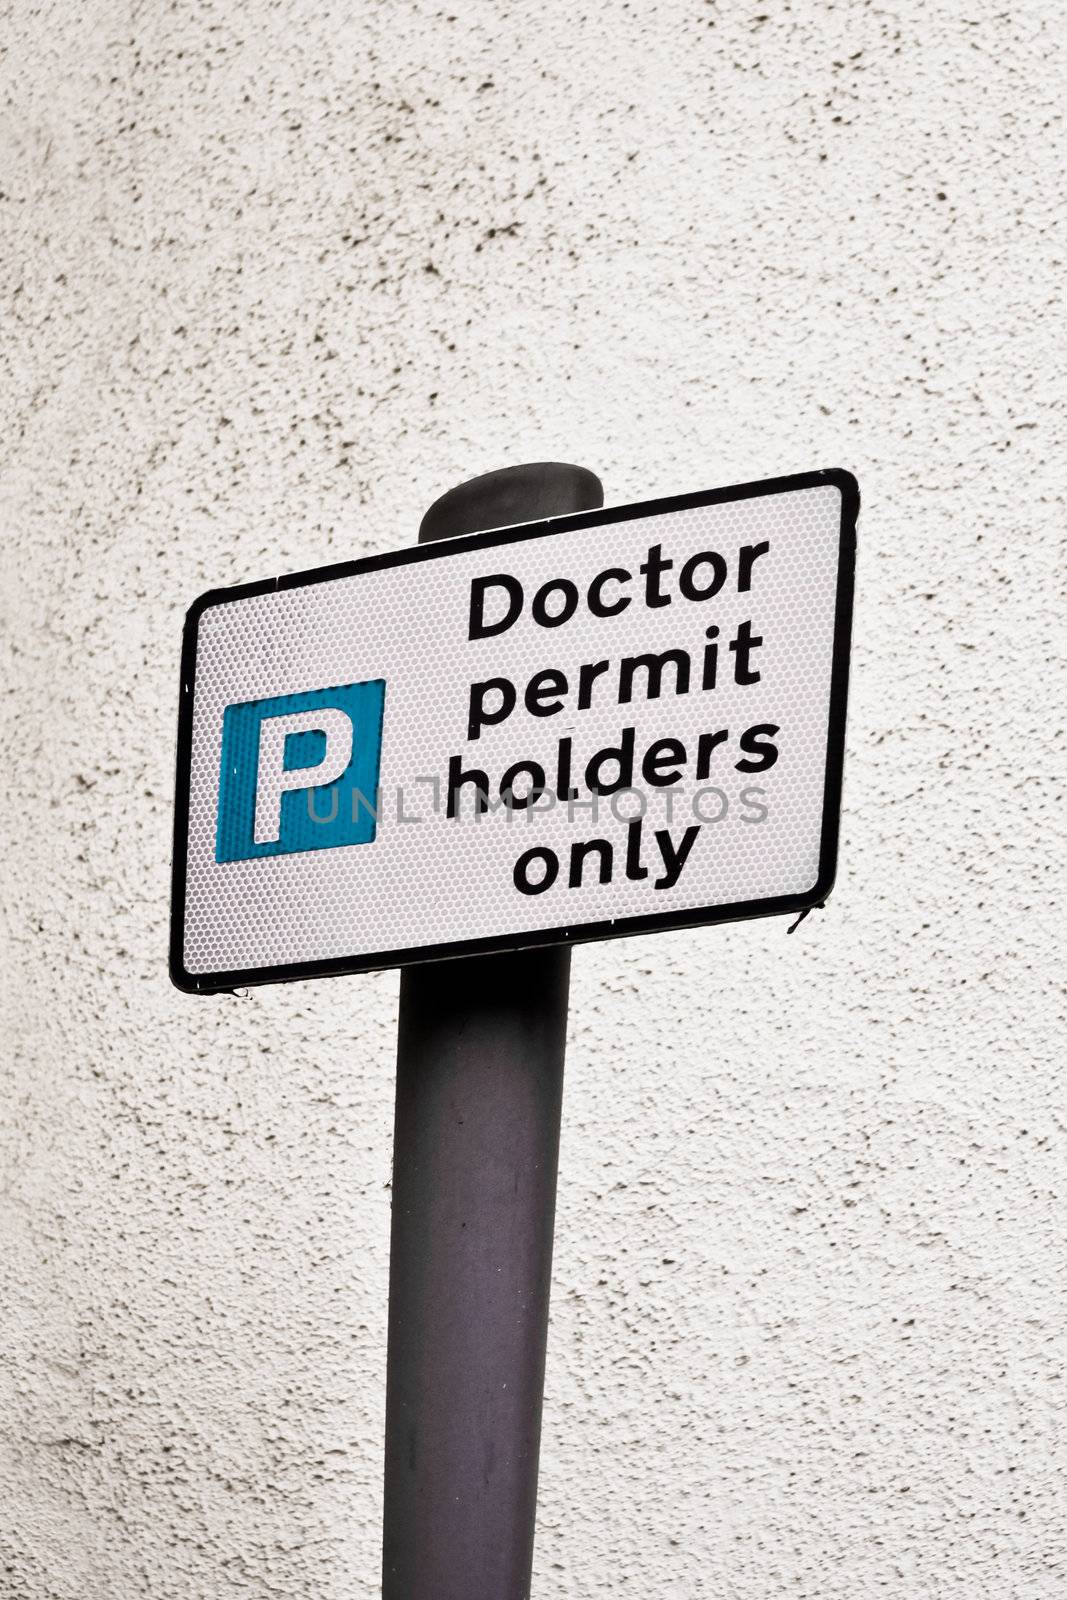 A parking sign for doctor parking only